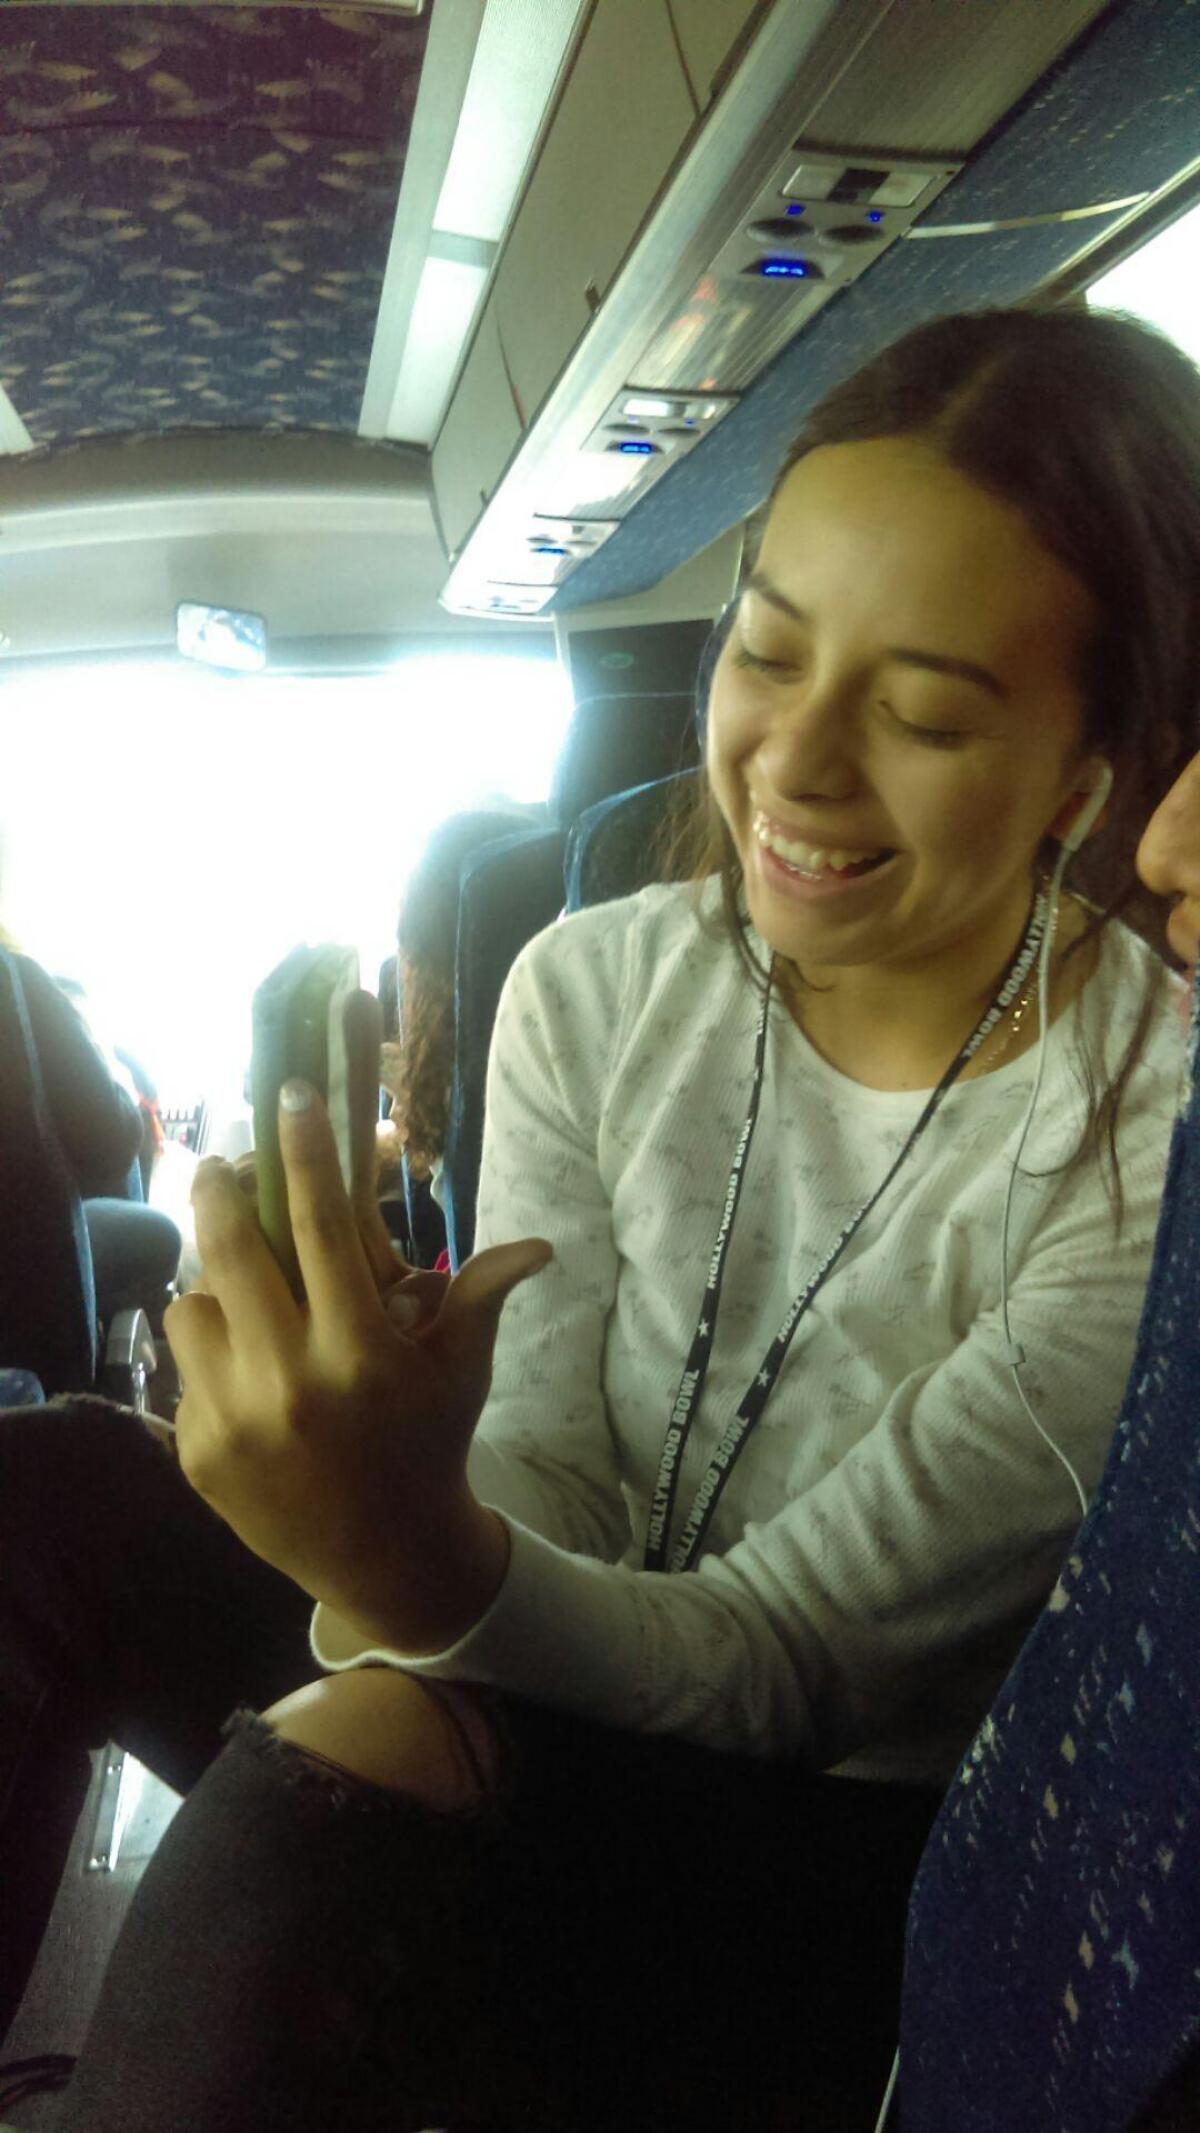 Lizeth Martinez keeps busy with Snapchat filters on our four-hour bus ride to Visalia.